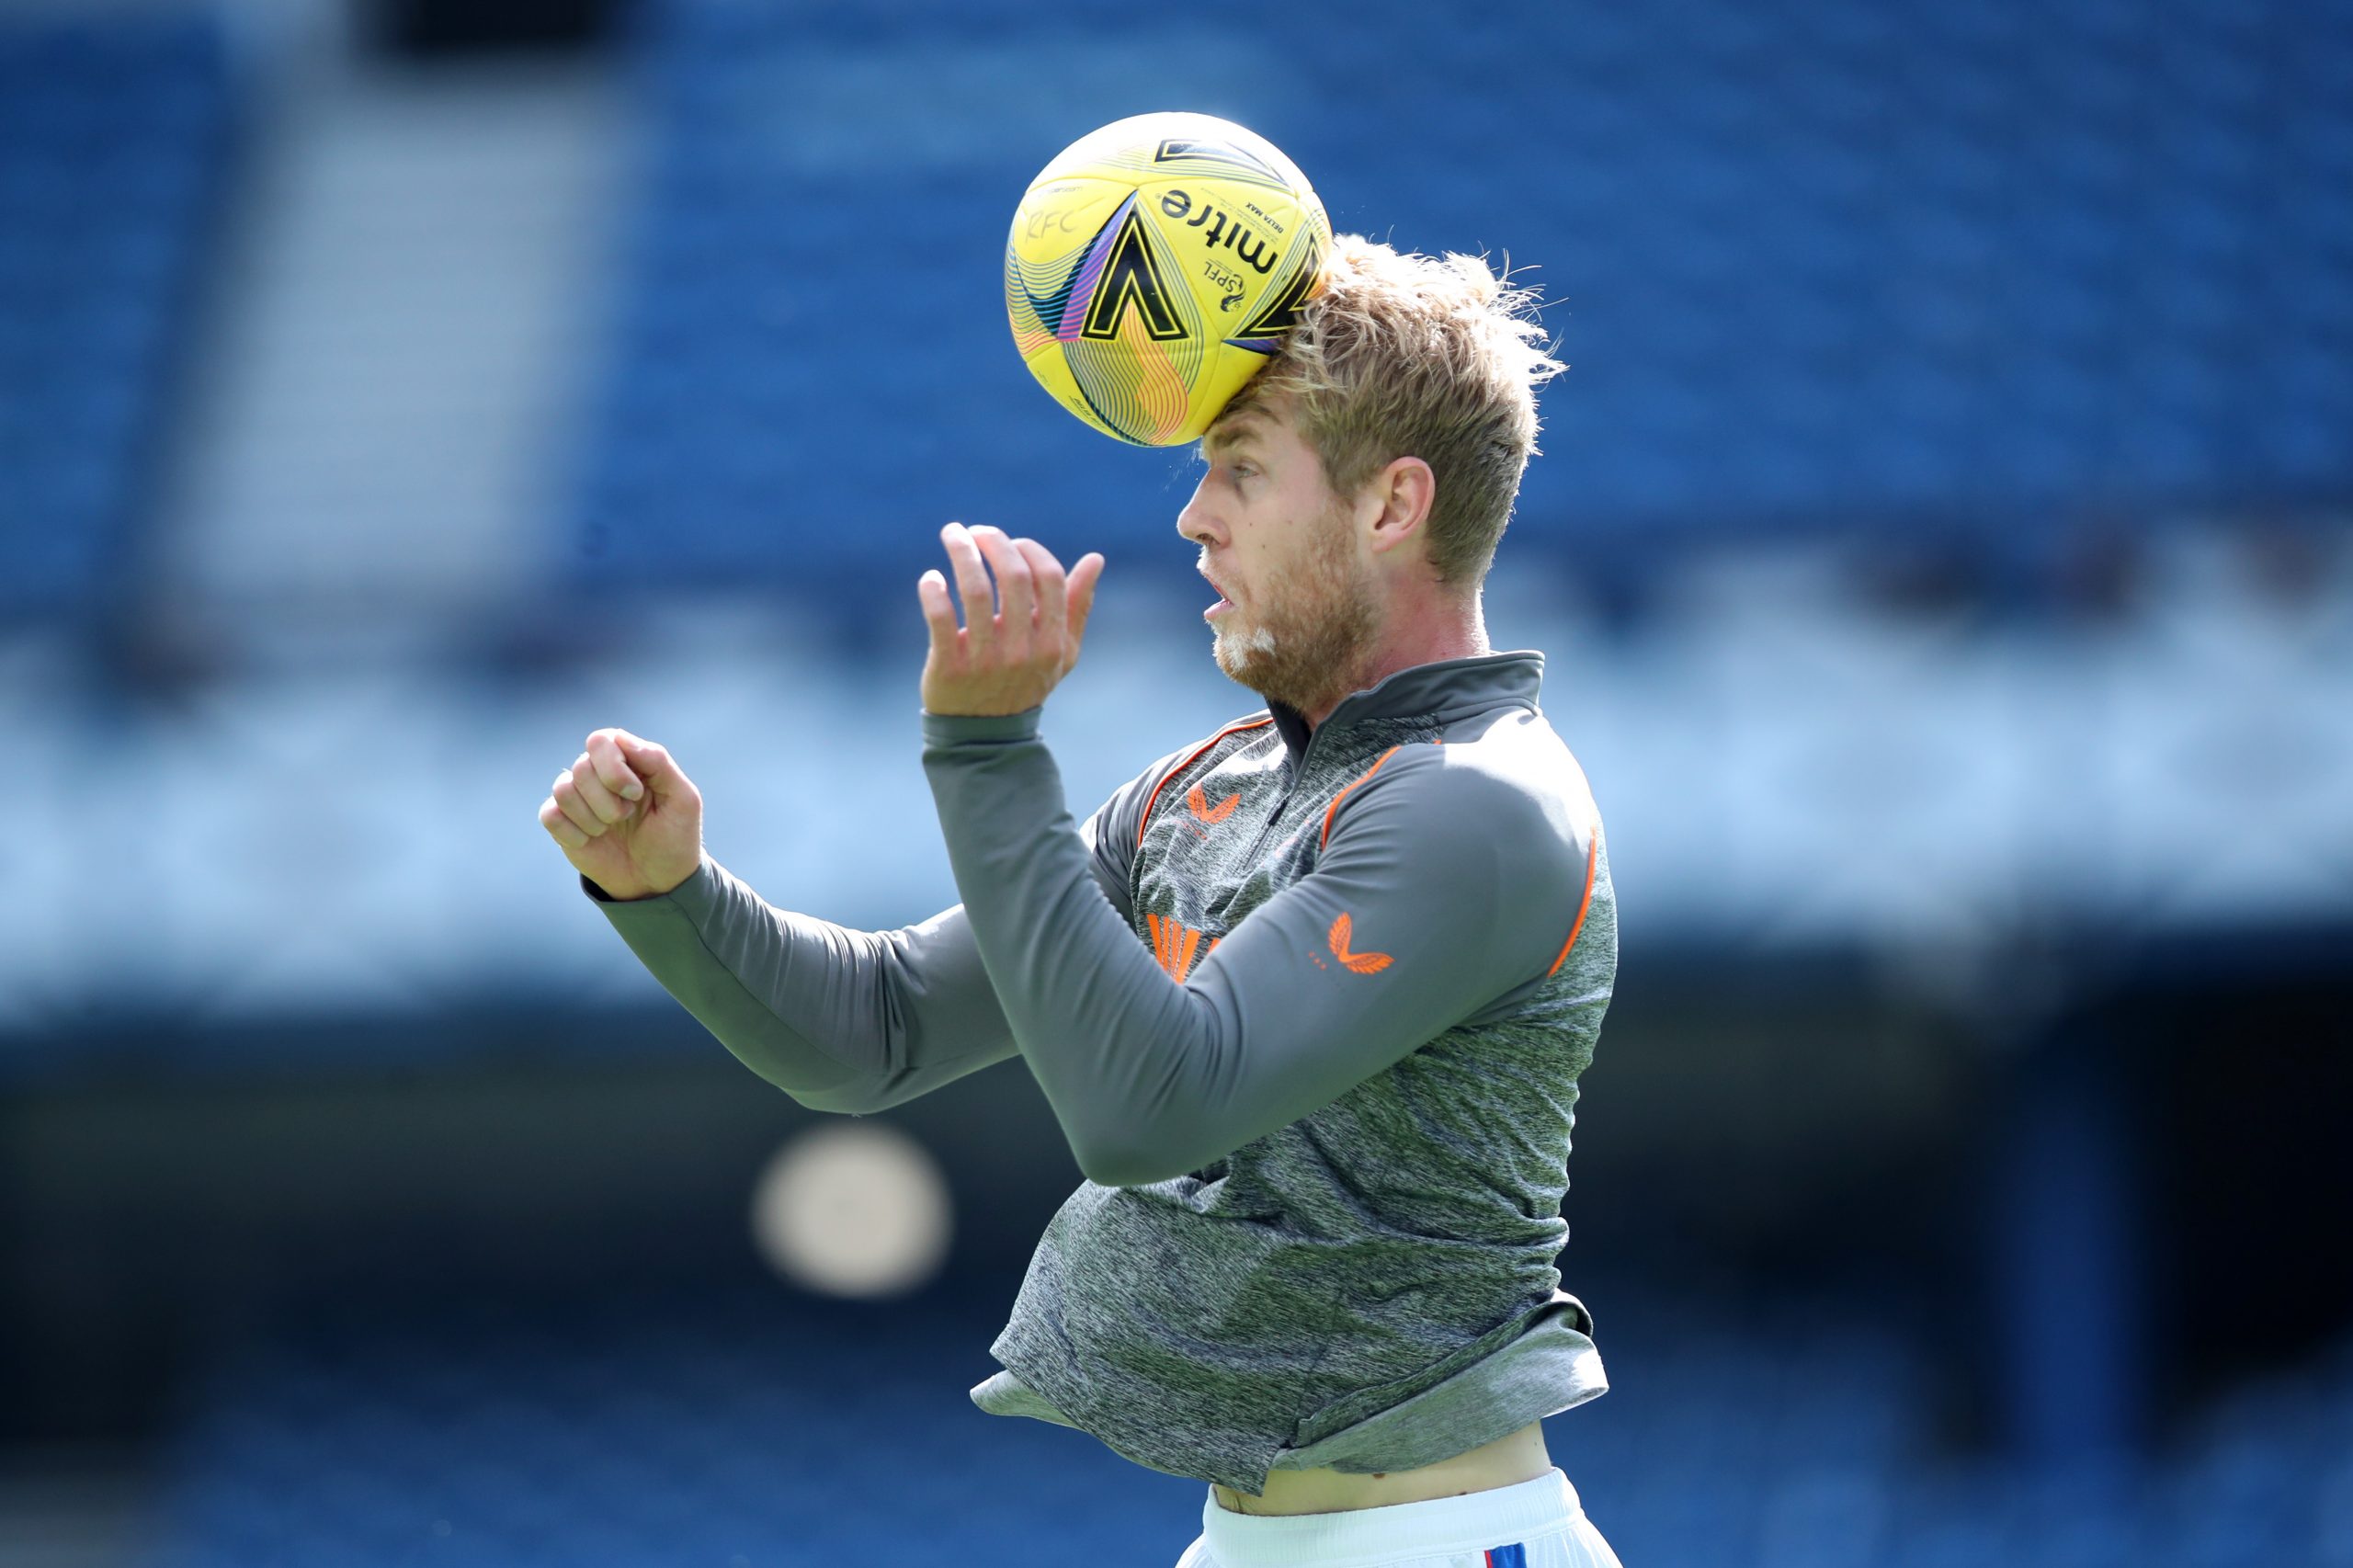 GLASGOW, SCOTLAND - AUGUST 22: Filip Helander of Rangers FC warms up prior to the Ladbrokes Scottish Premiership match between Rangers and Kilmarnock at Ibrox Stadium on August 22, 2020 in Glasgow, Scotland. (Photo by Ian MacNicol/Getty Images)